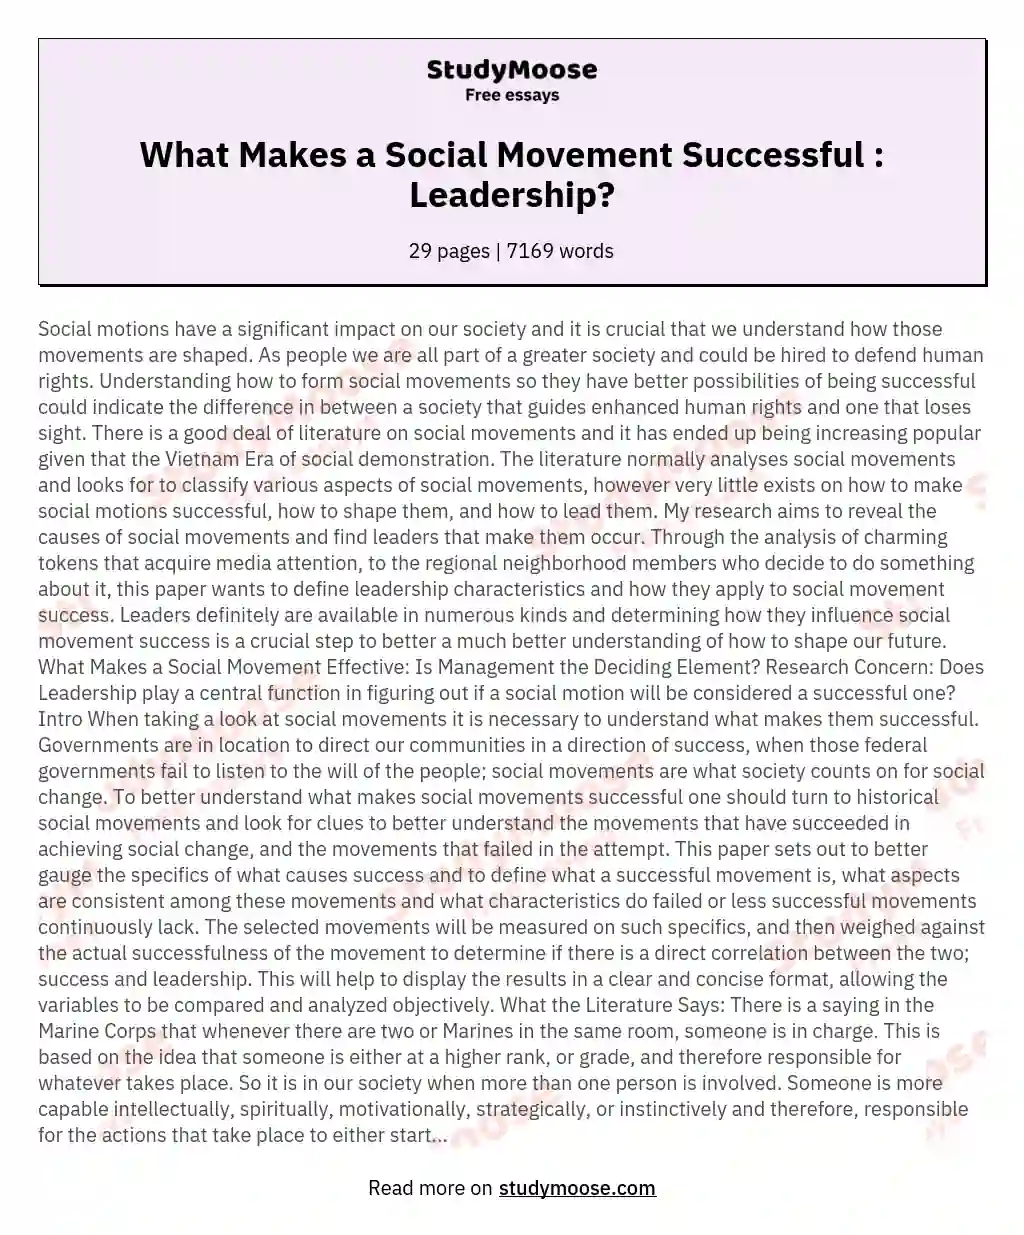 What Makes a Social Movement Successful : Leadership? essay